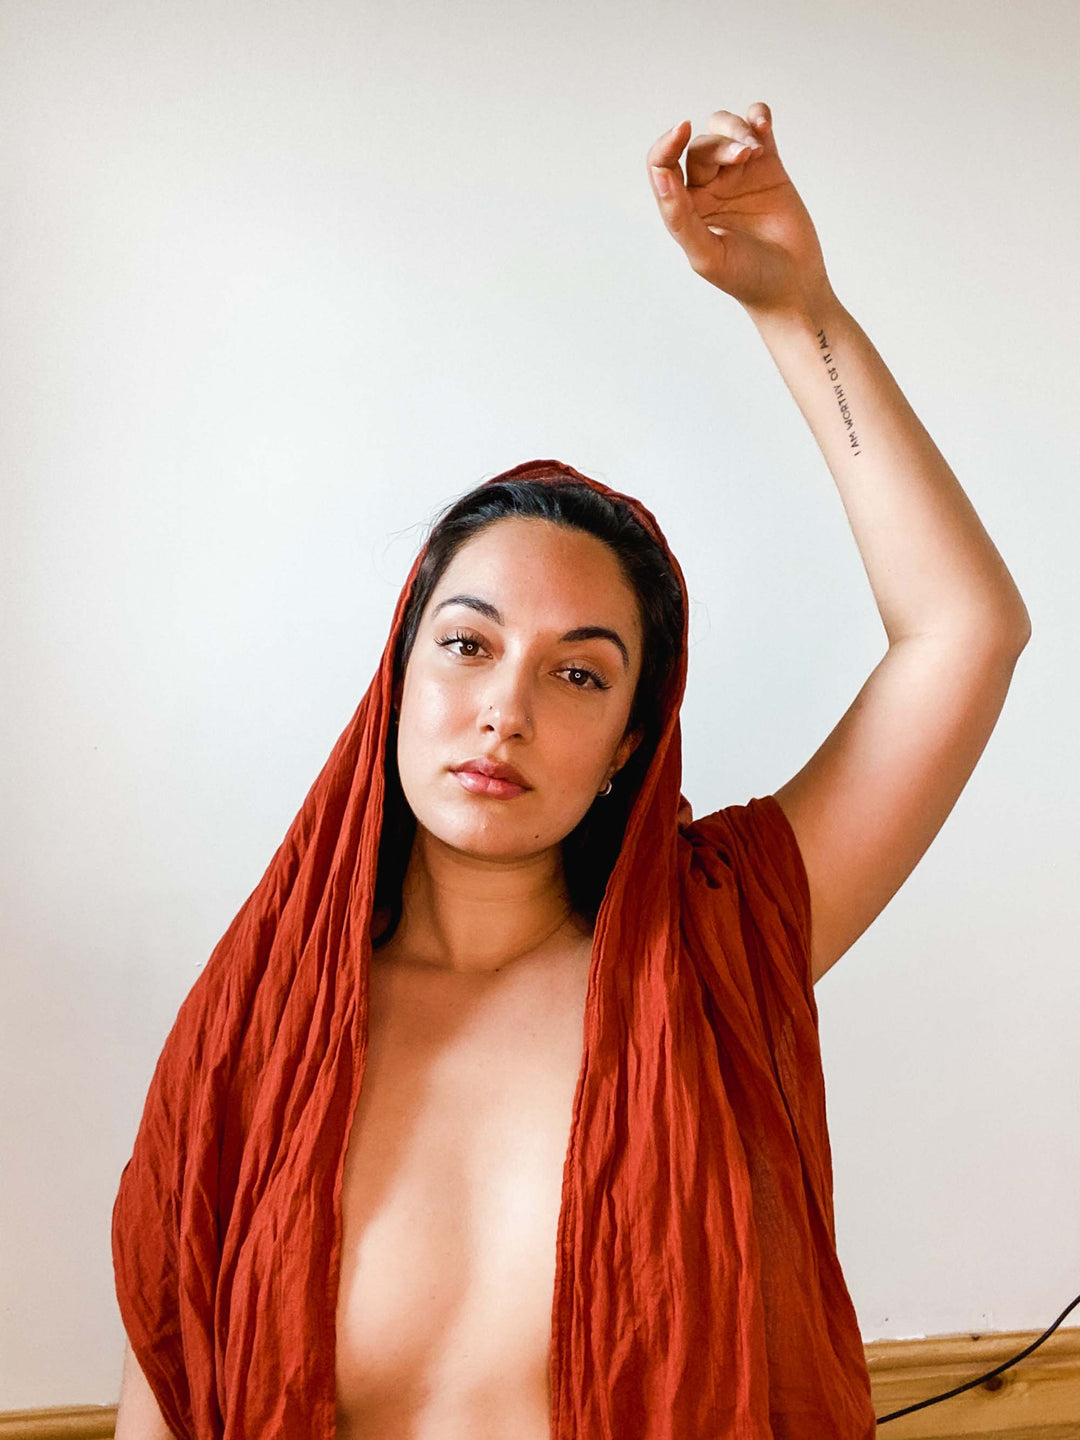 Woman is clothed in long red wrap that drapes over her head, shoulders and chest. Her left arm is in the air above her head.